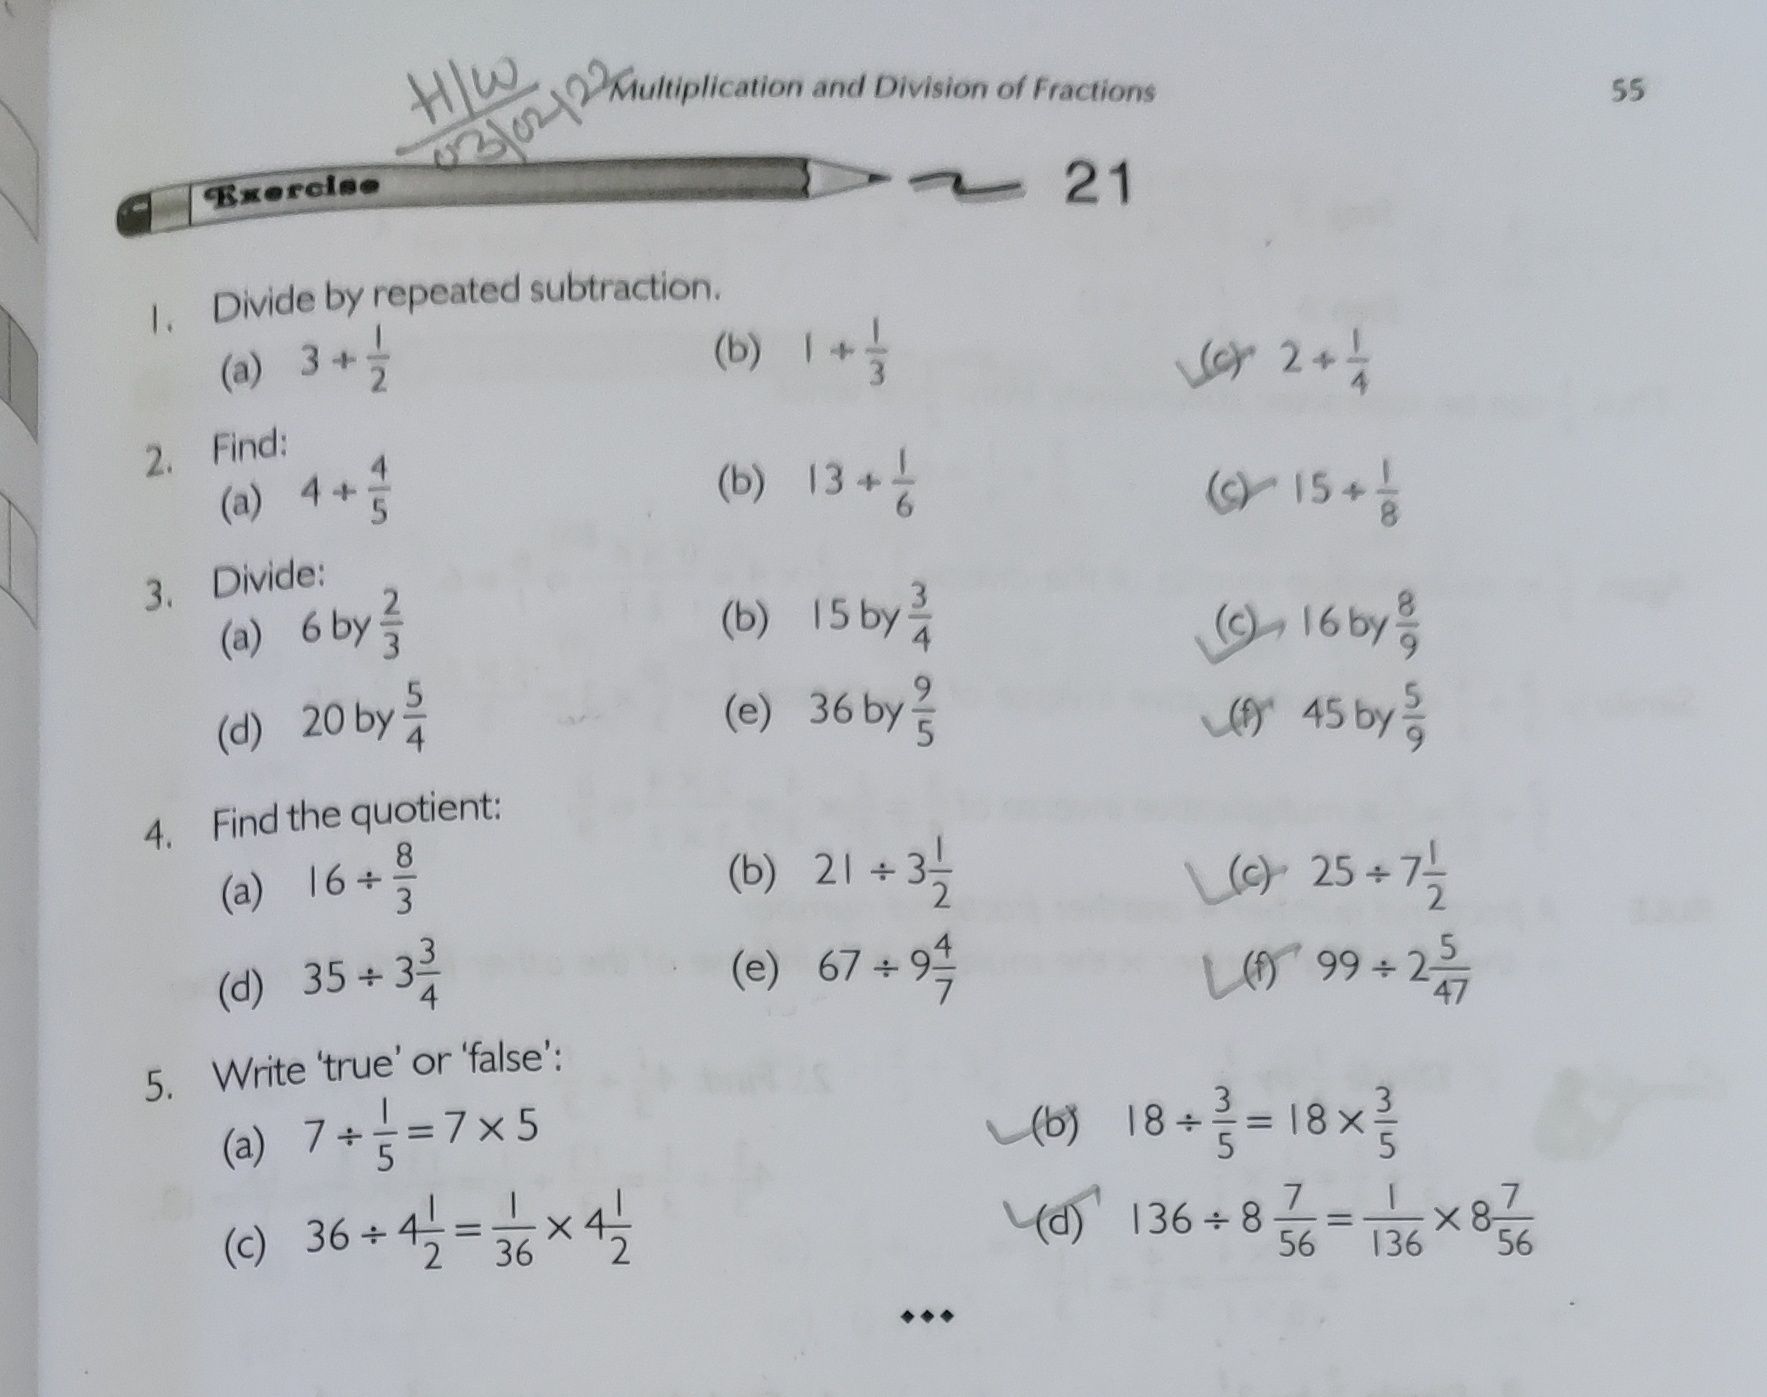 multiplication-and-division-of-fractions-maths-assignment-teachmint